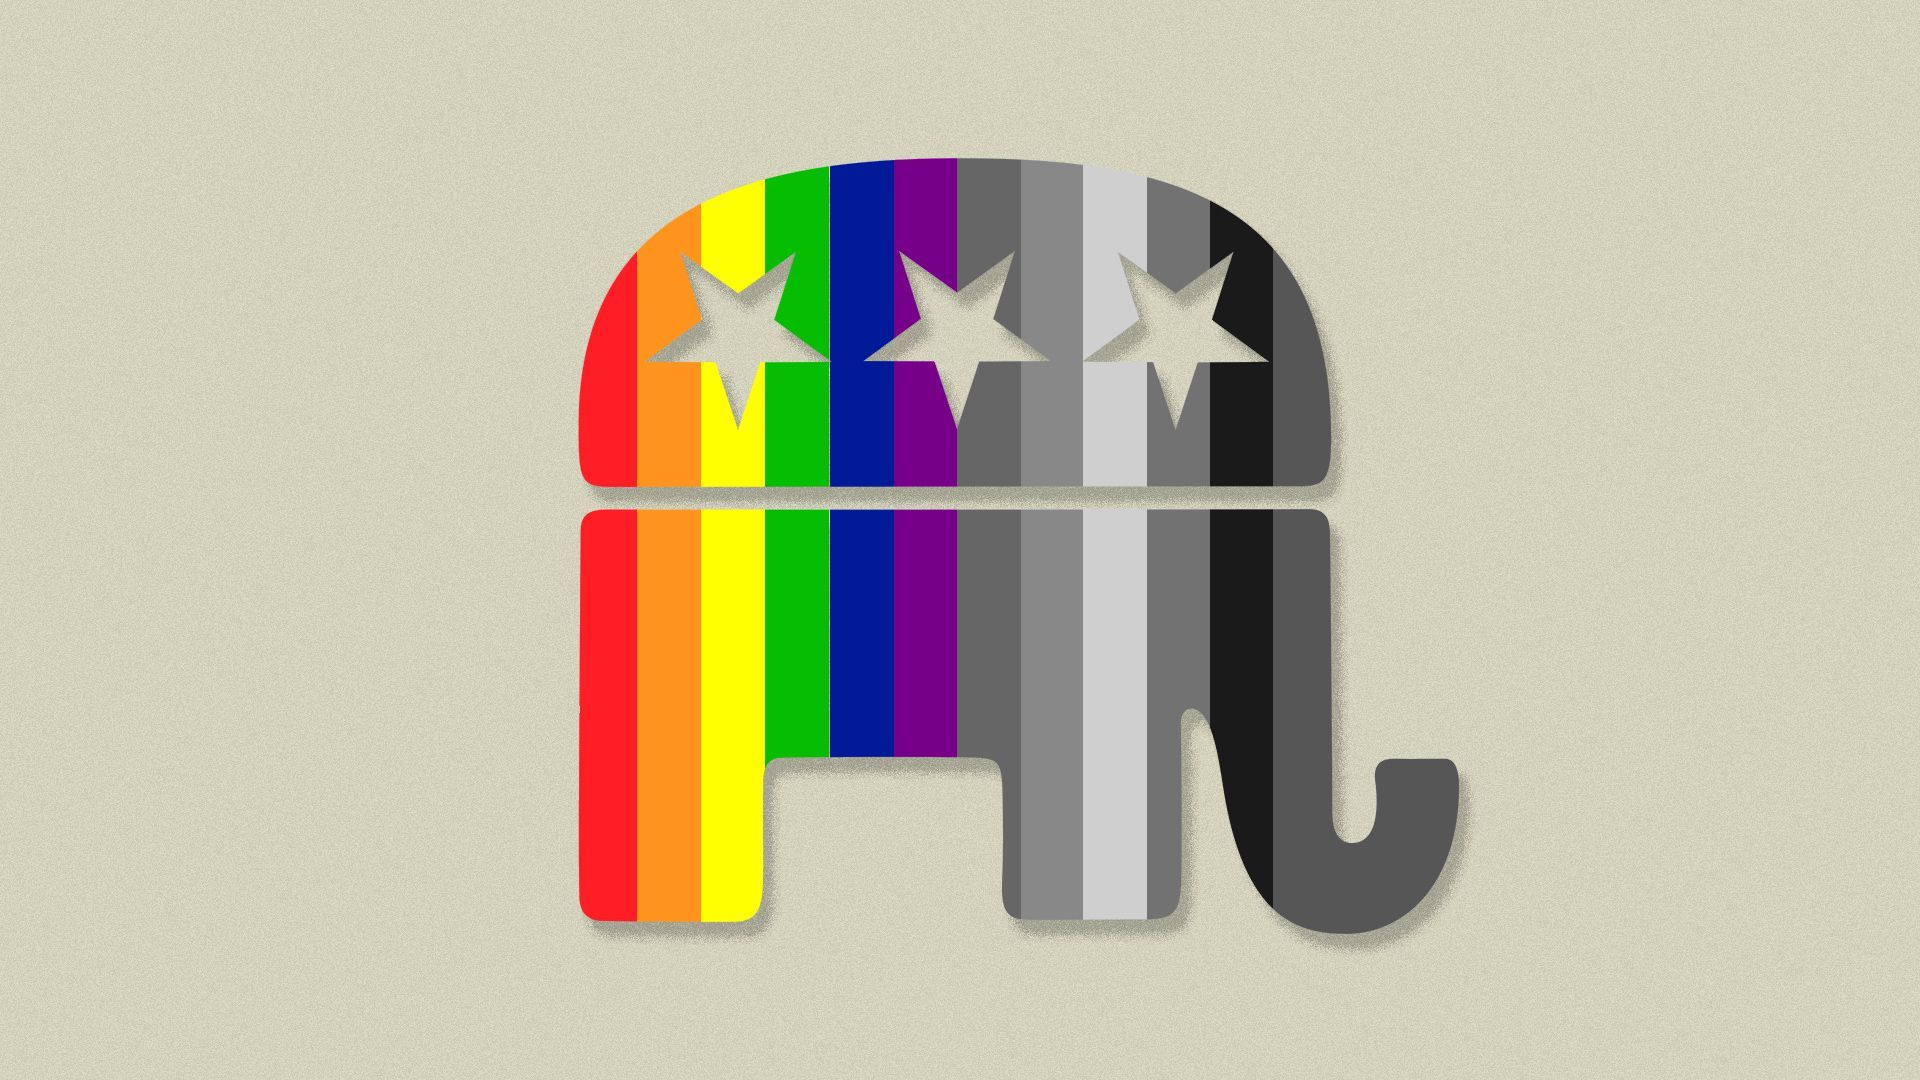 Illustration of GOP logo filled in with the rainbow flag colors on one half and shades of gray on the other half.